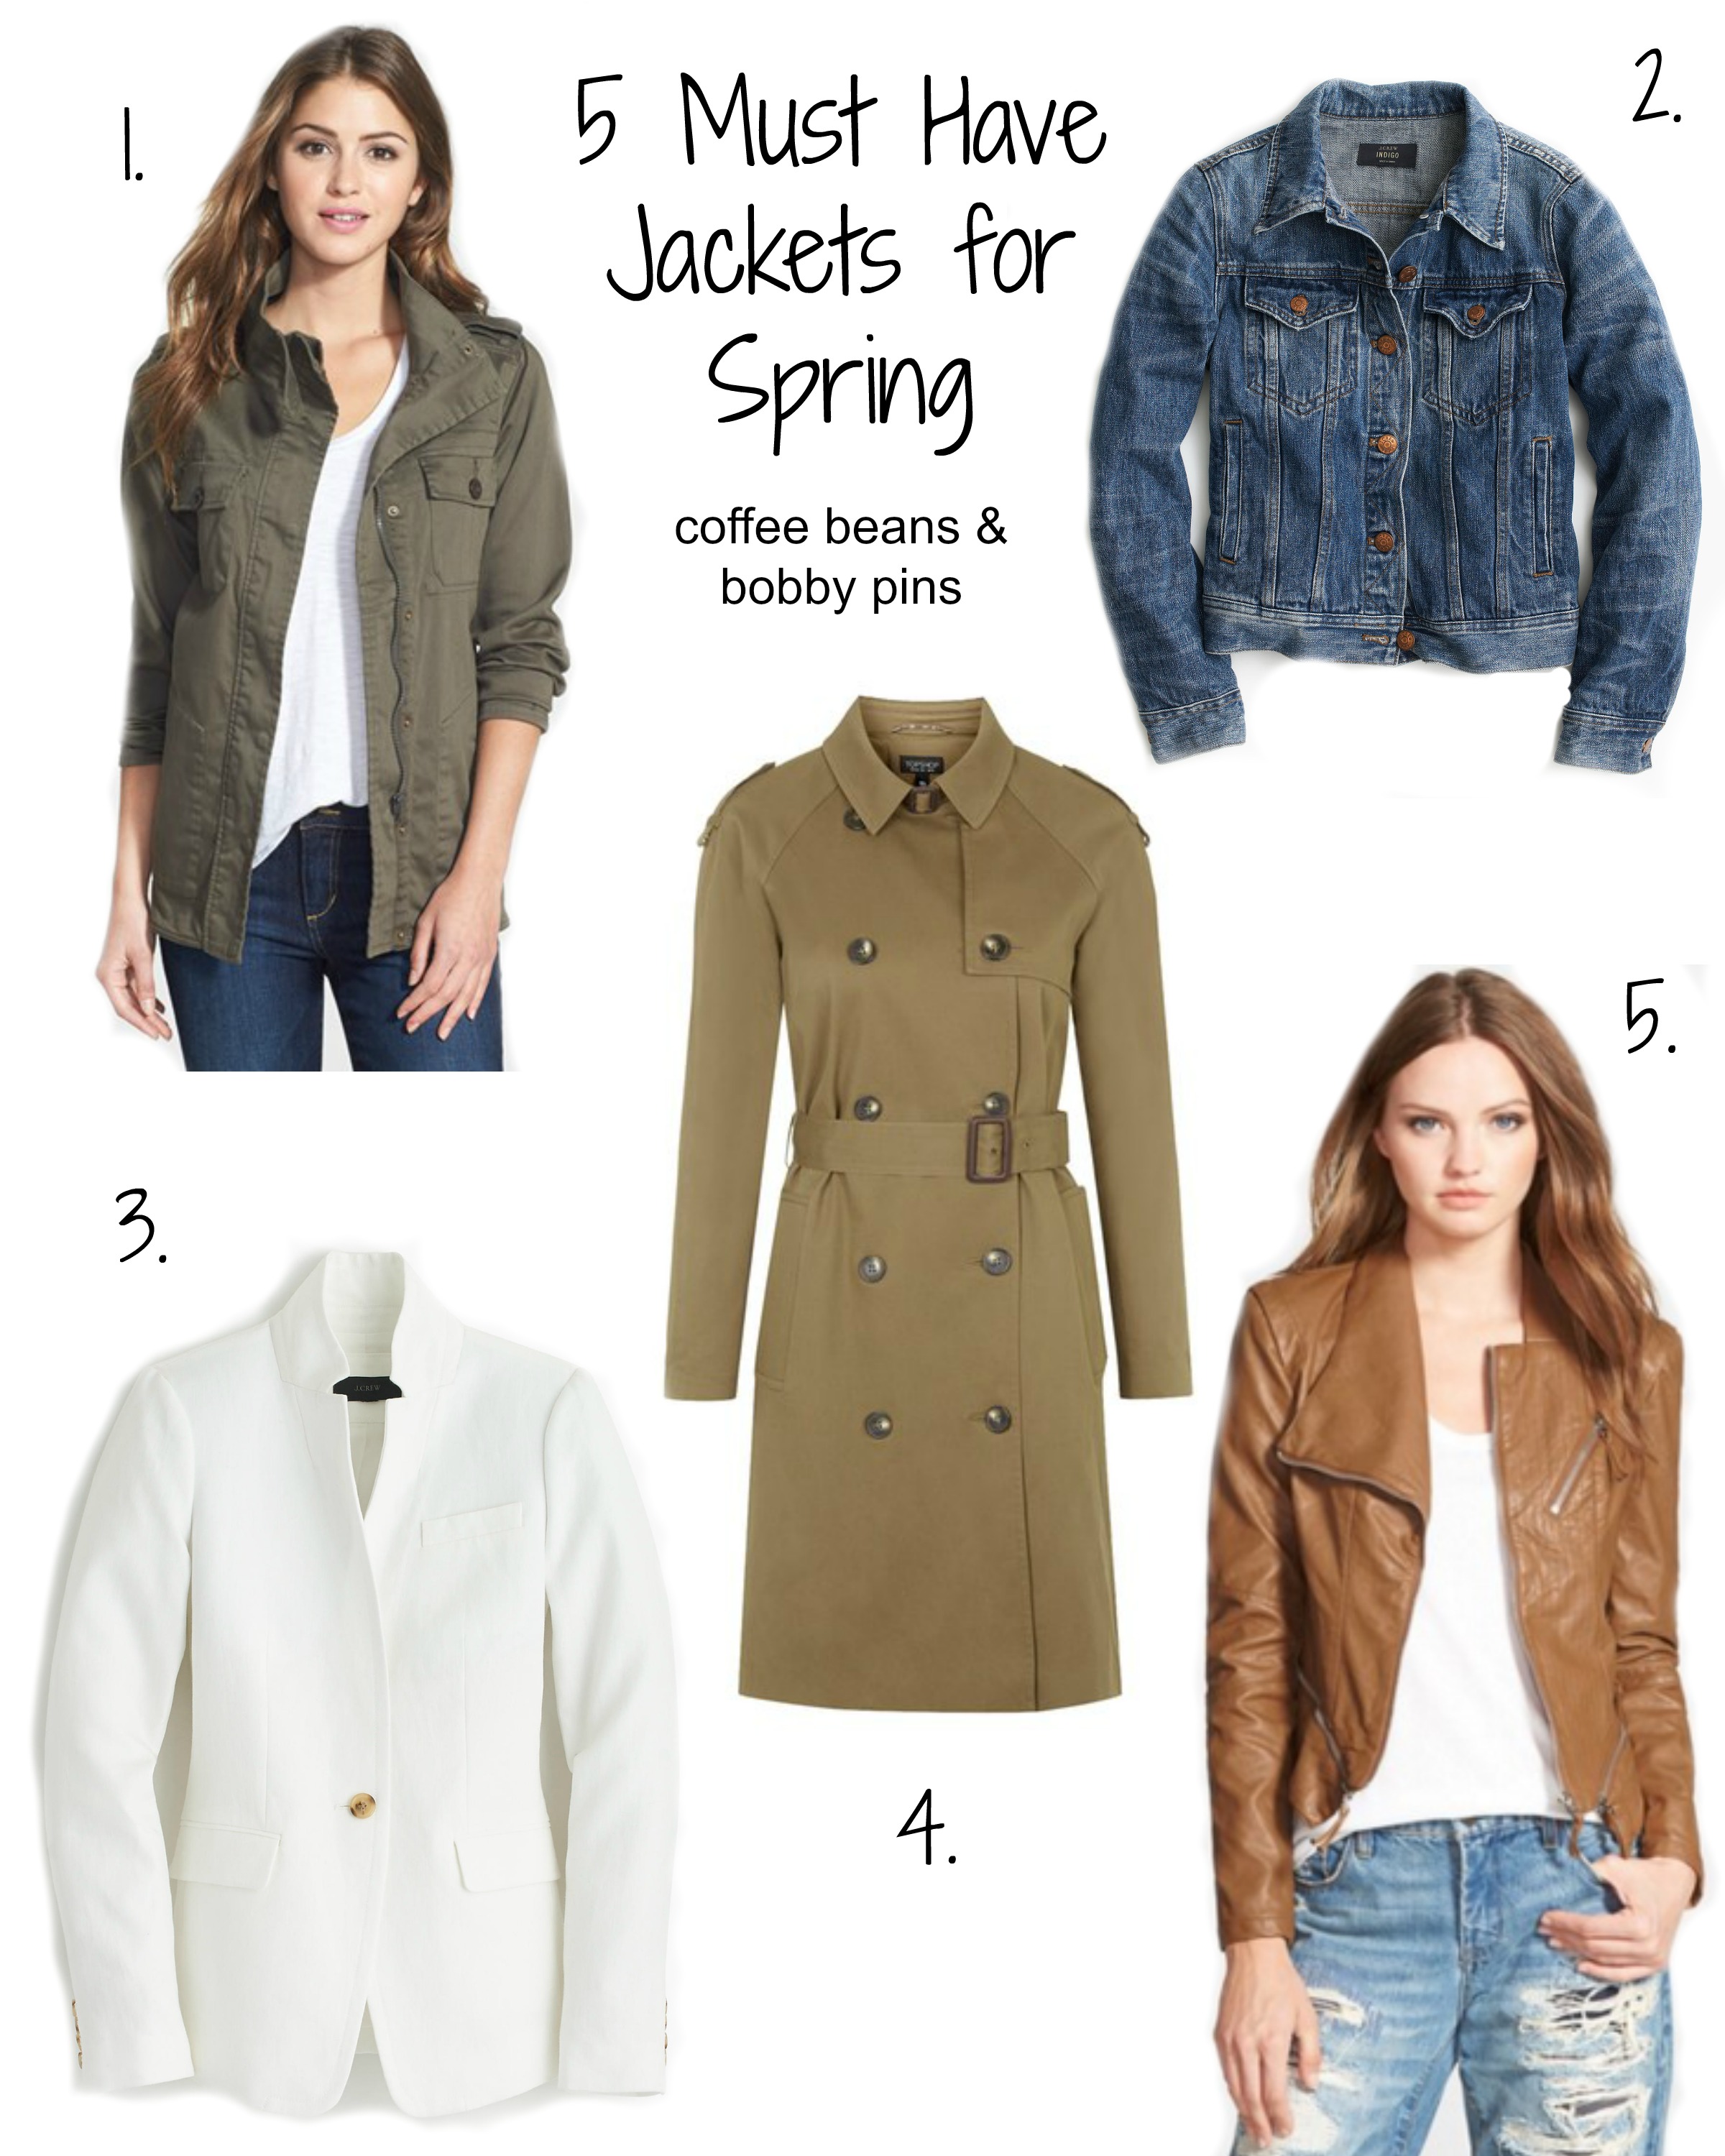 Jackets for spring